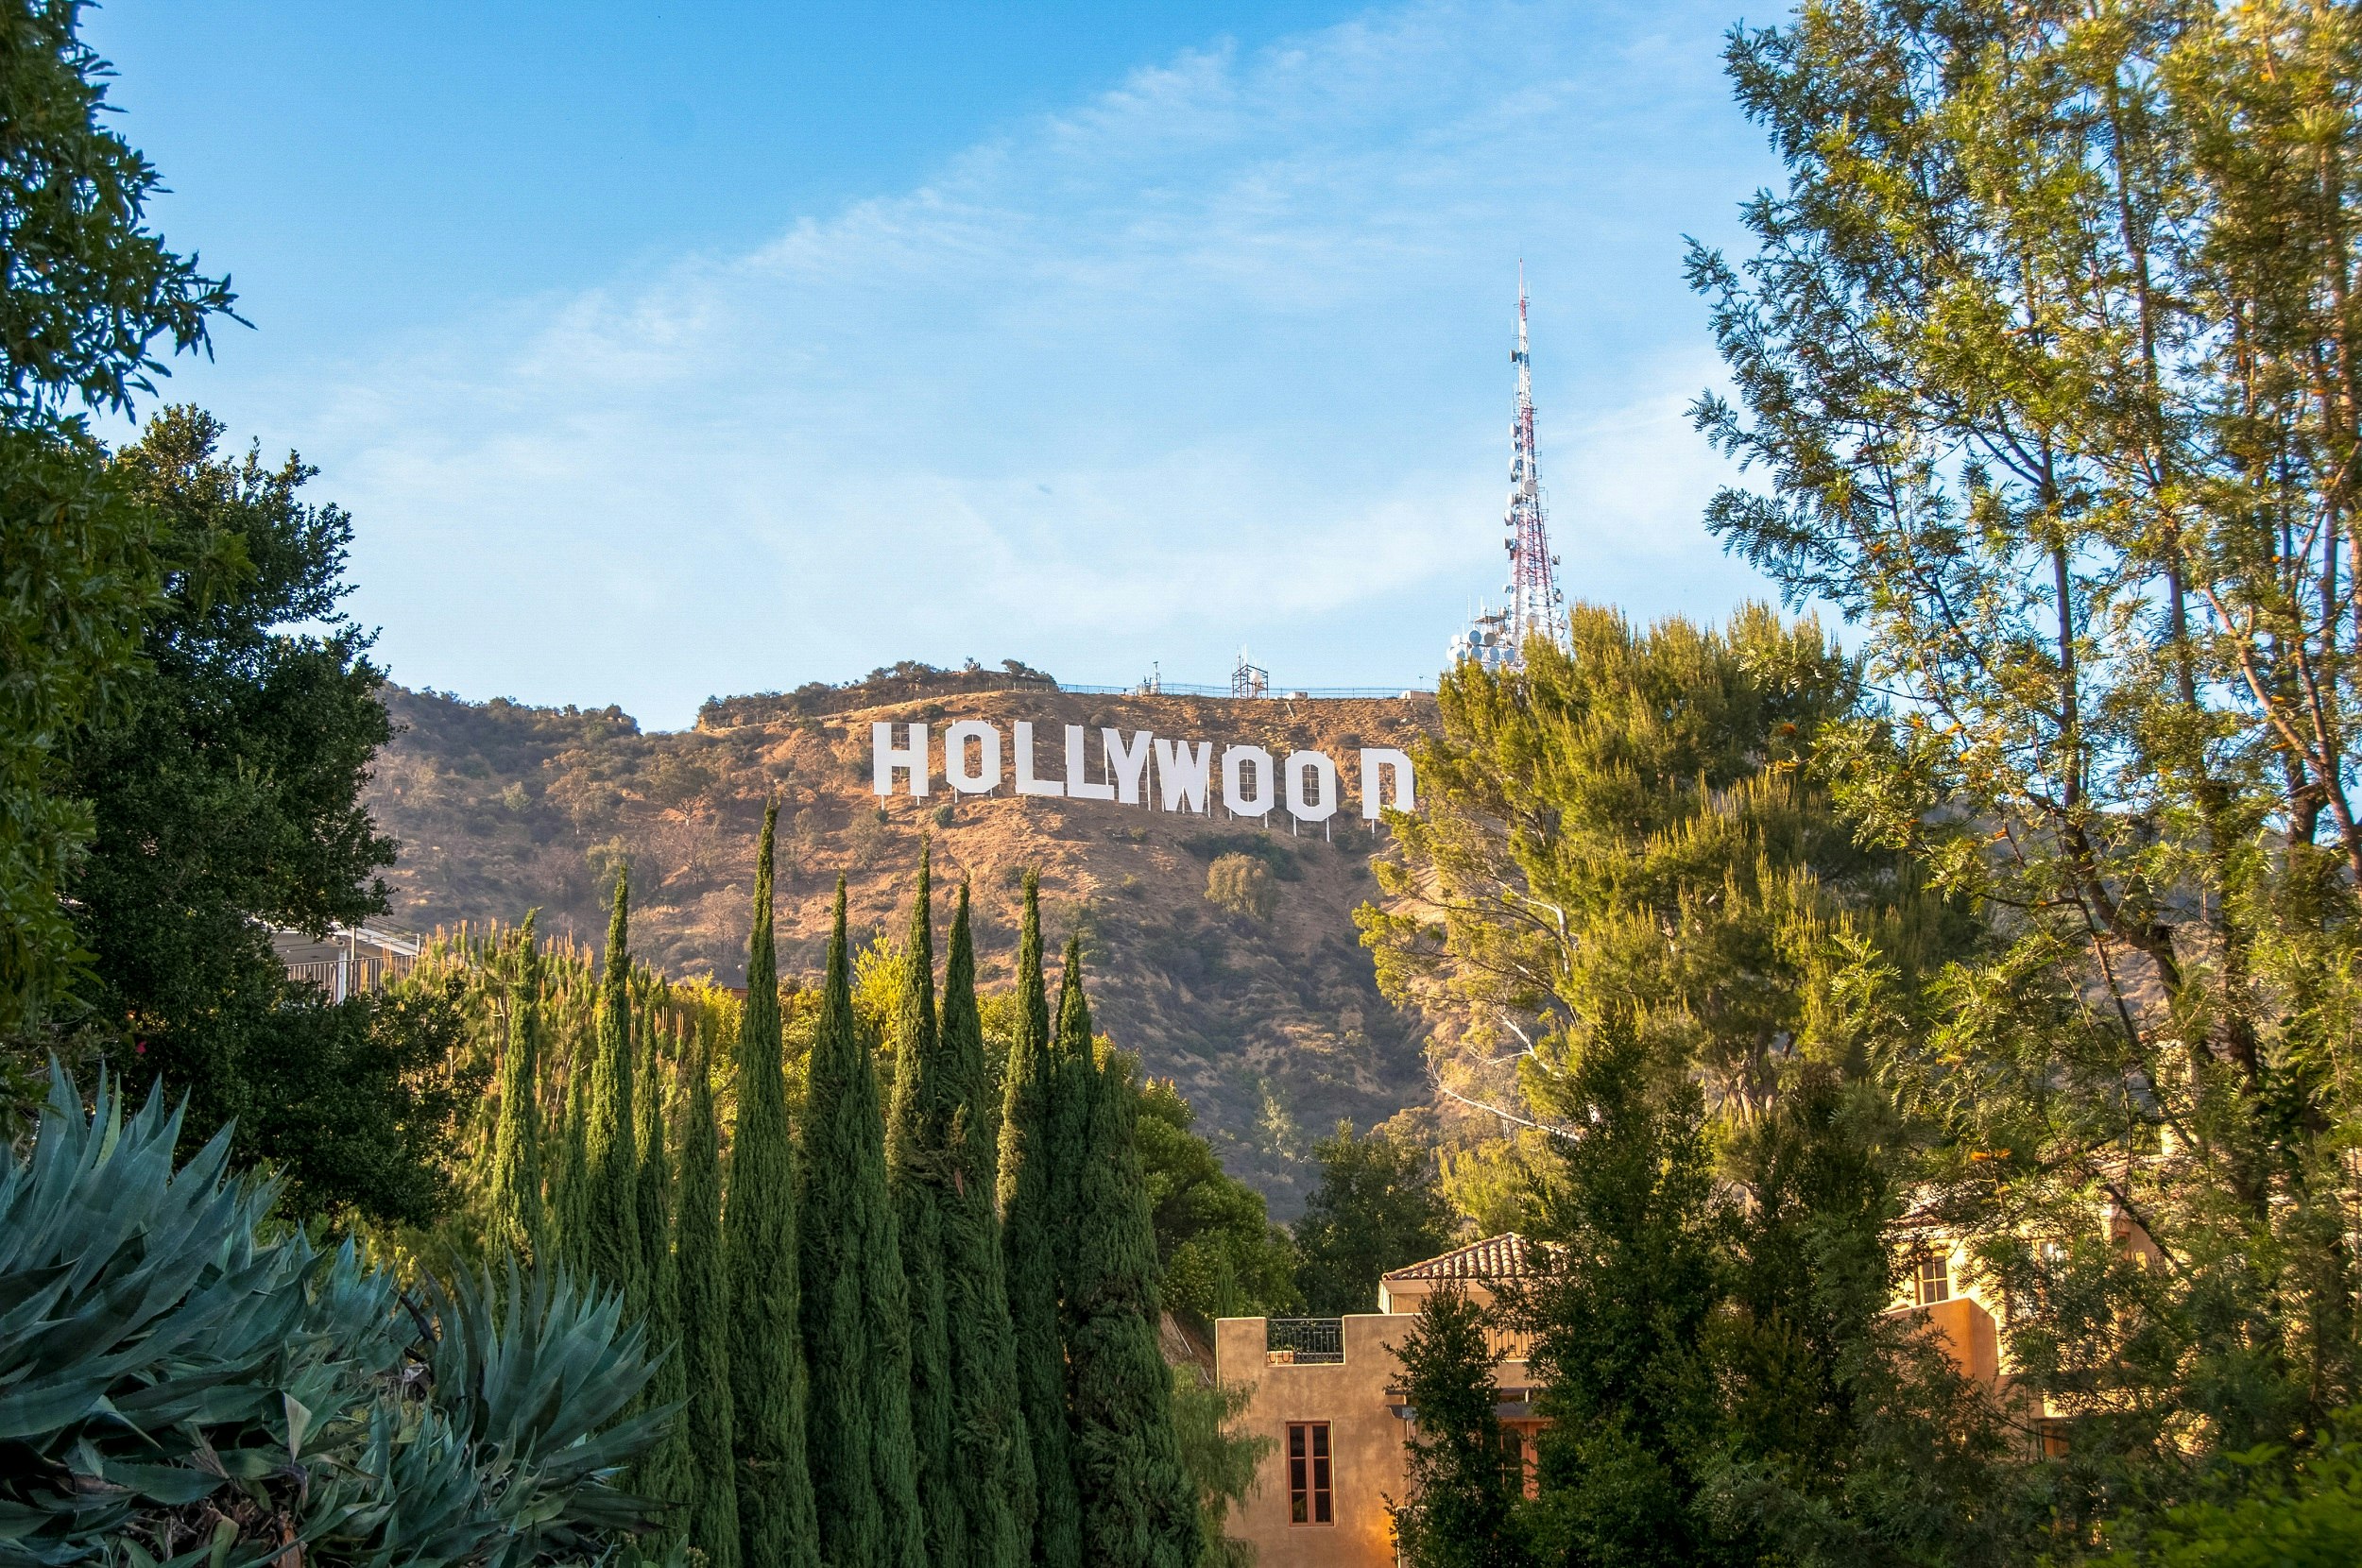 The famed Hollywood sign, comprised of huge white block letters, stands on the side of a forested slope.